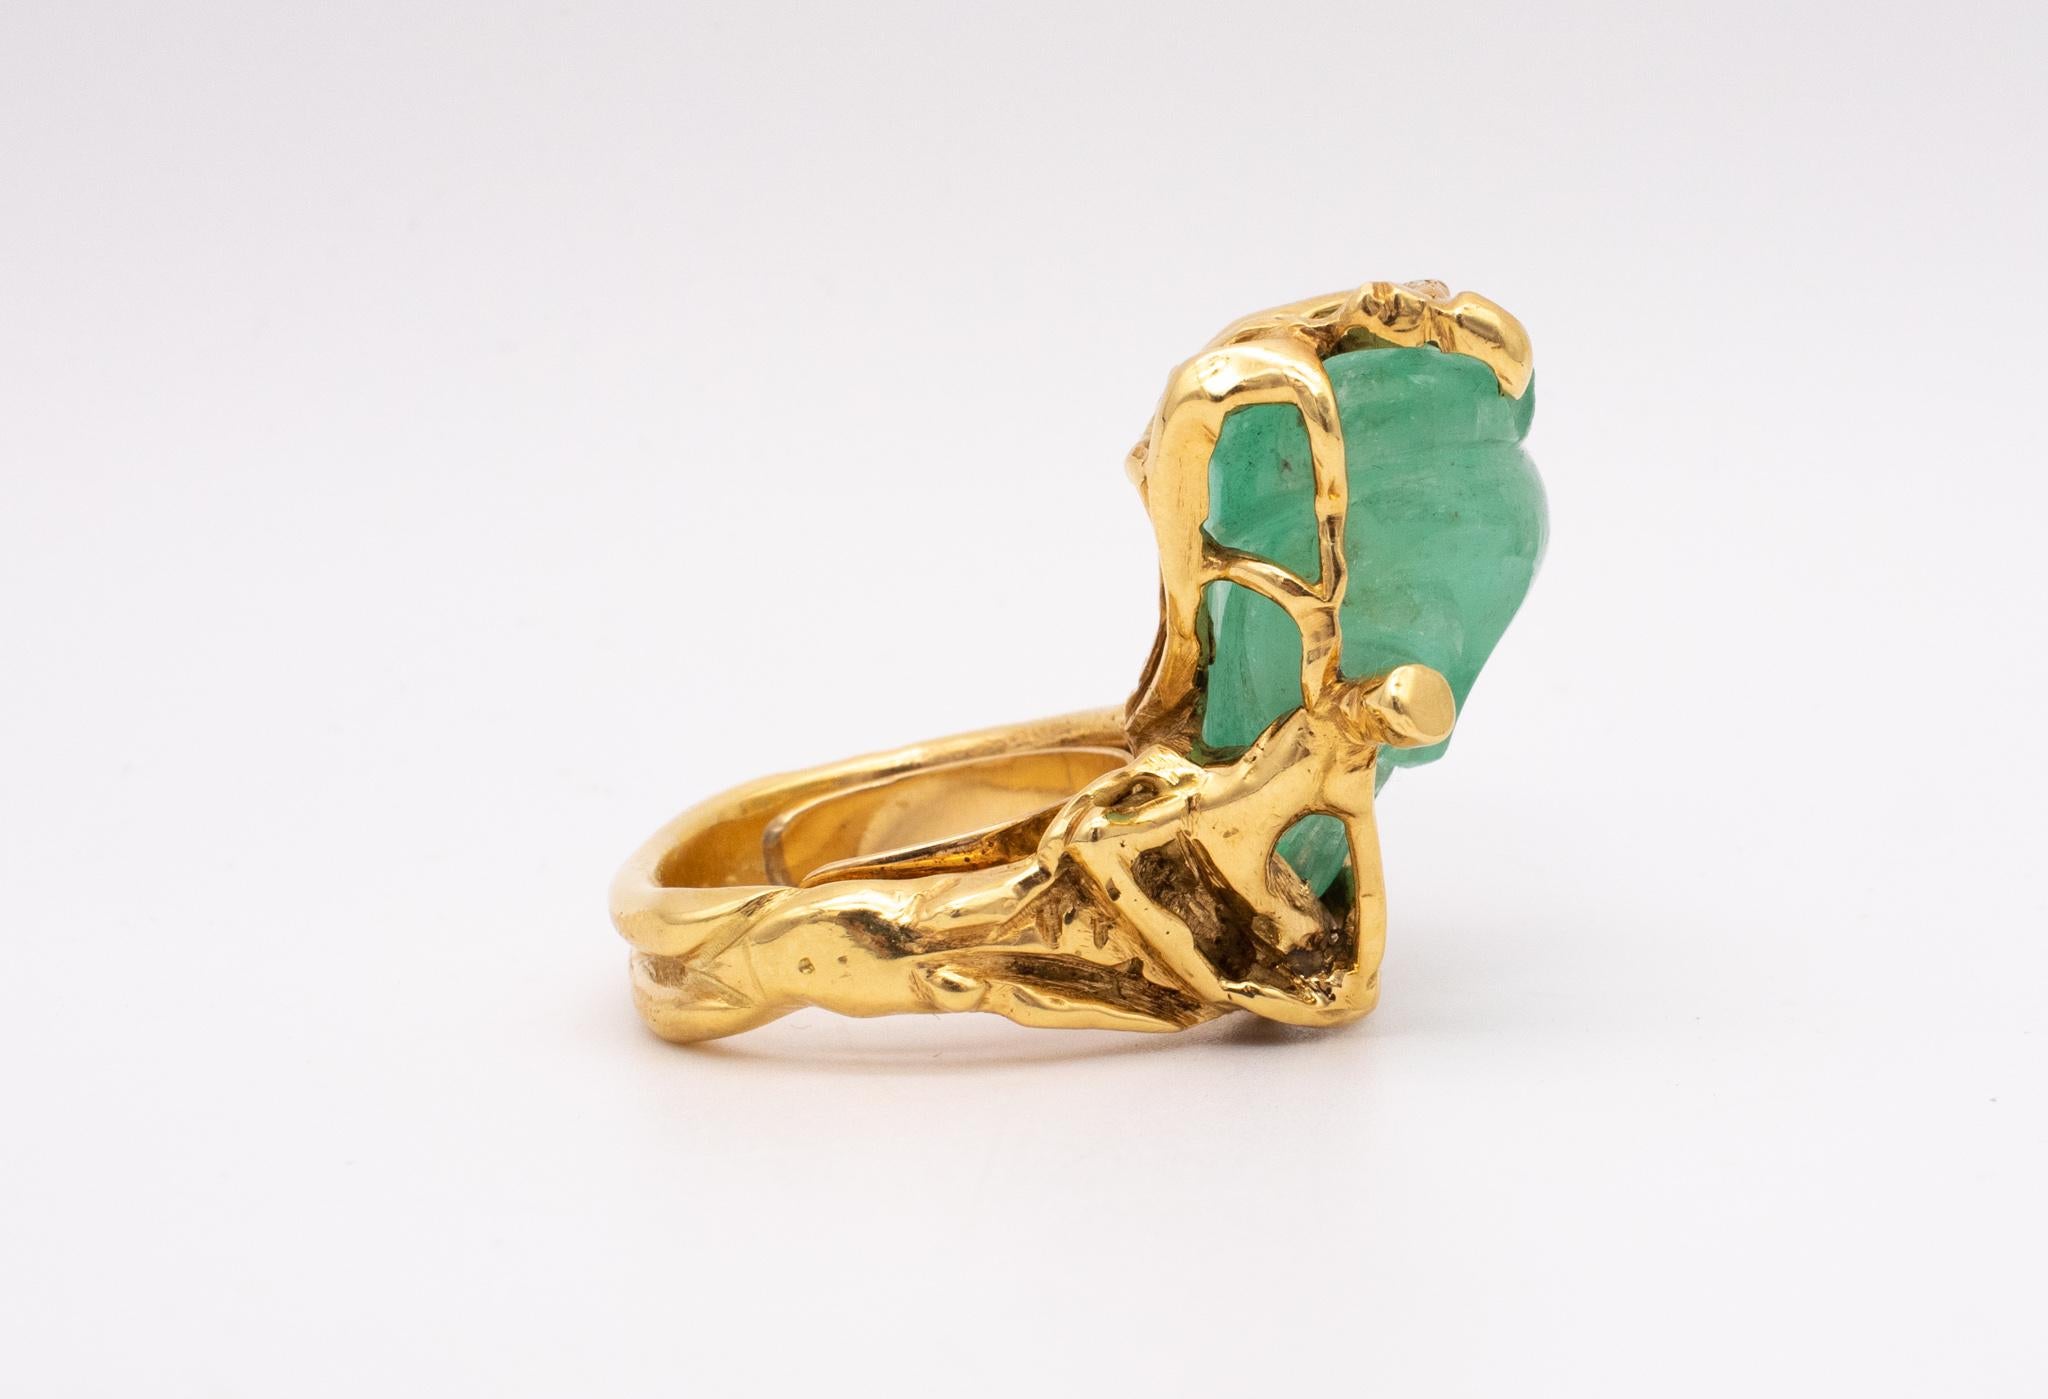 Eric De Kolb 1960 Rare Statement Ring in 18Kt Gold with 28.53 Cts Carved Emerald 2